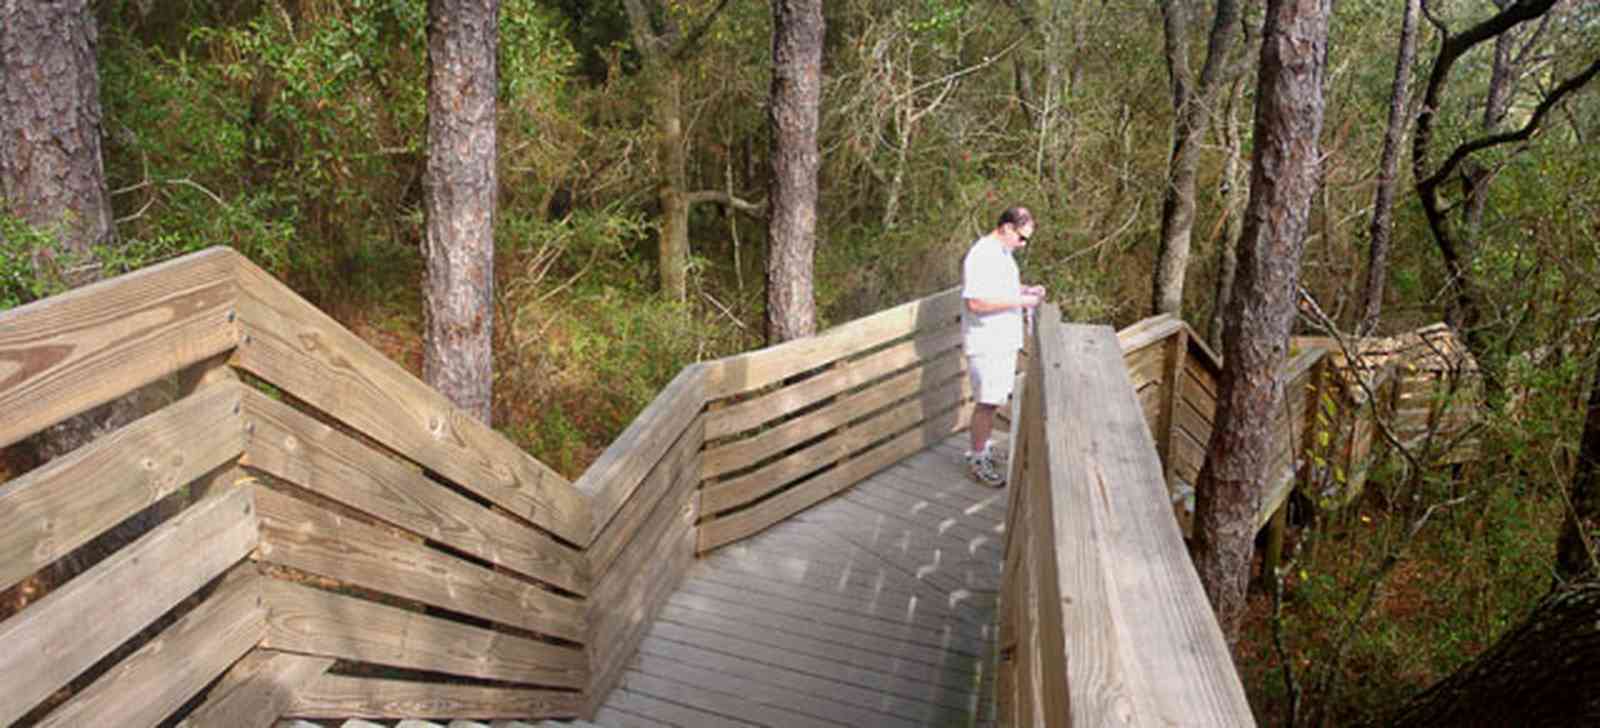 Scenic-Highway:-Bay-Bluffs-Park_01.jpg:  deck, stairs, pine trees